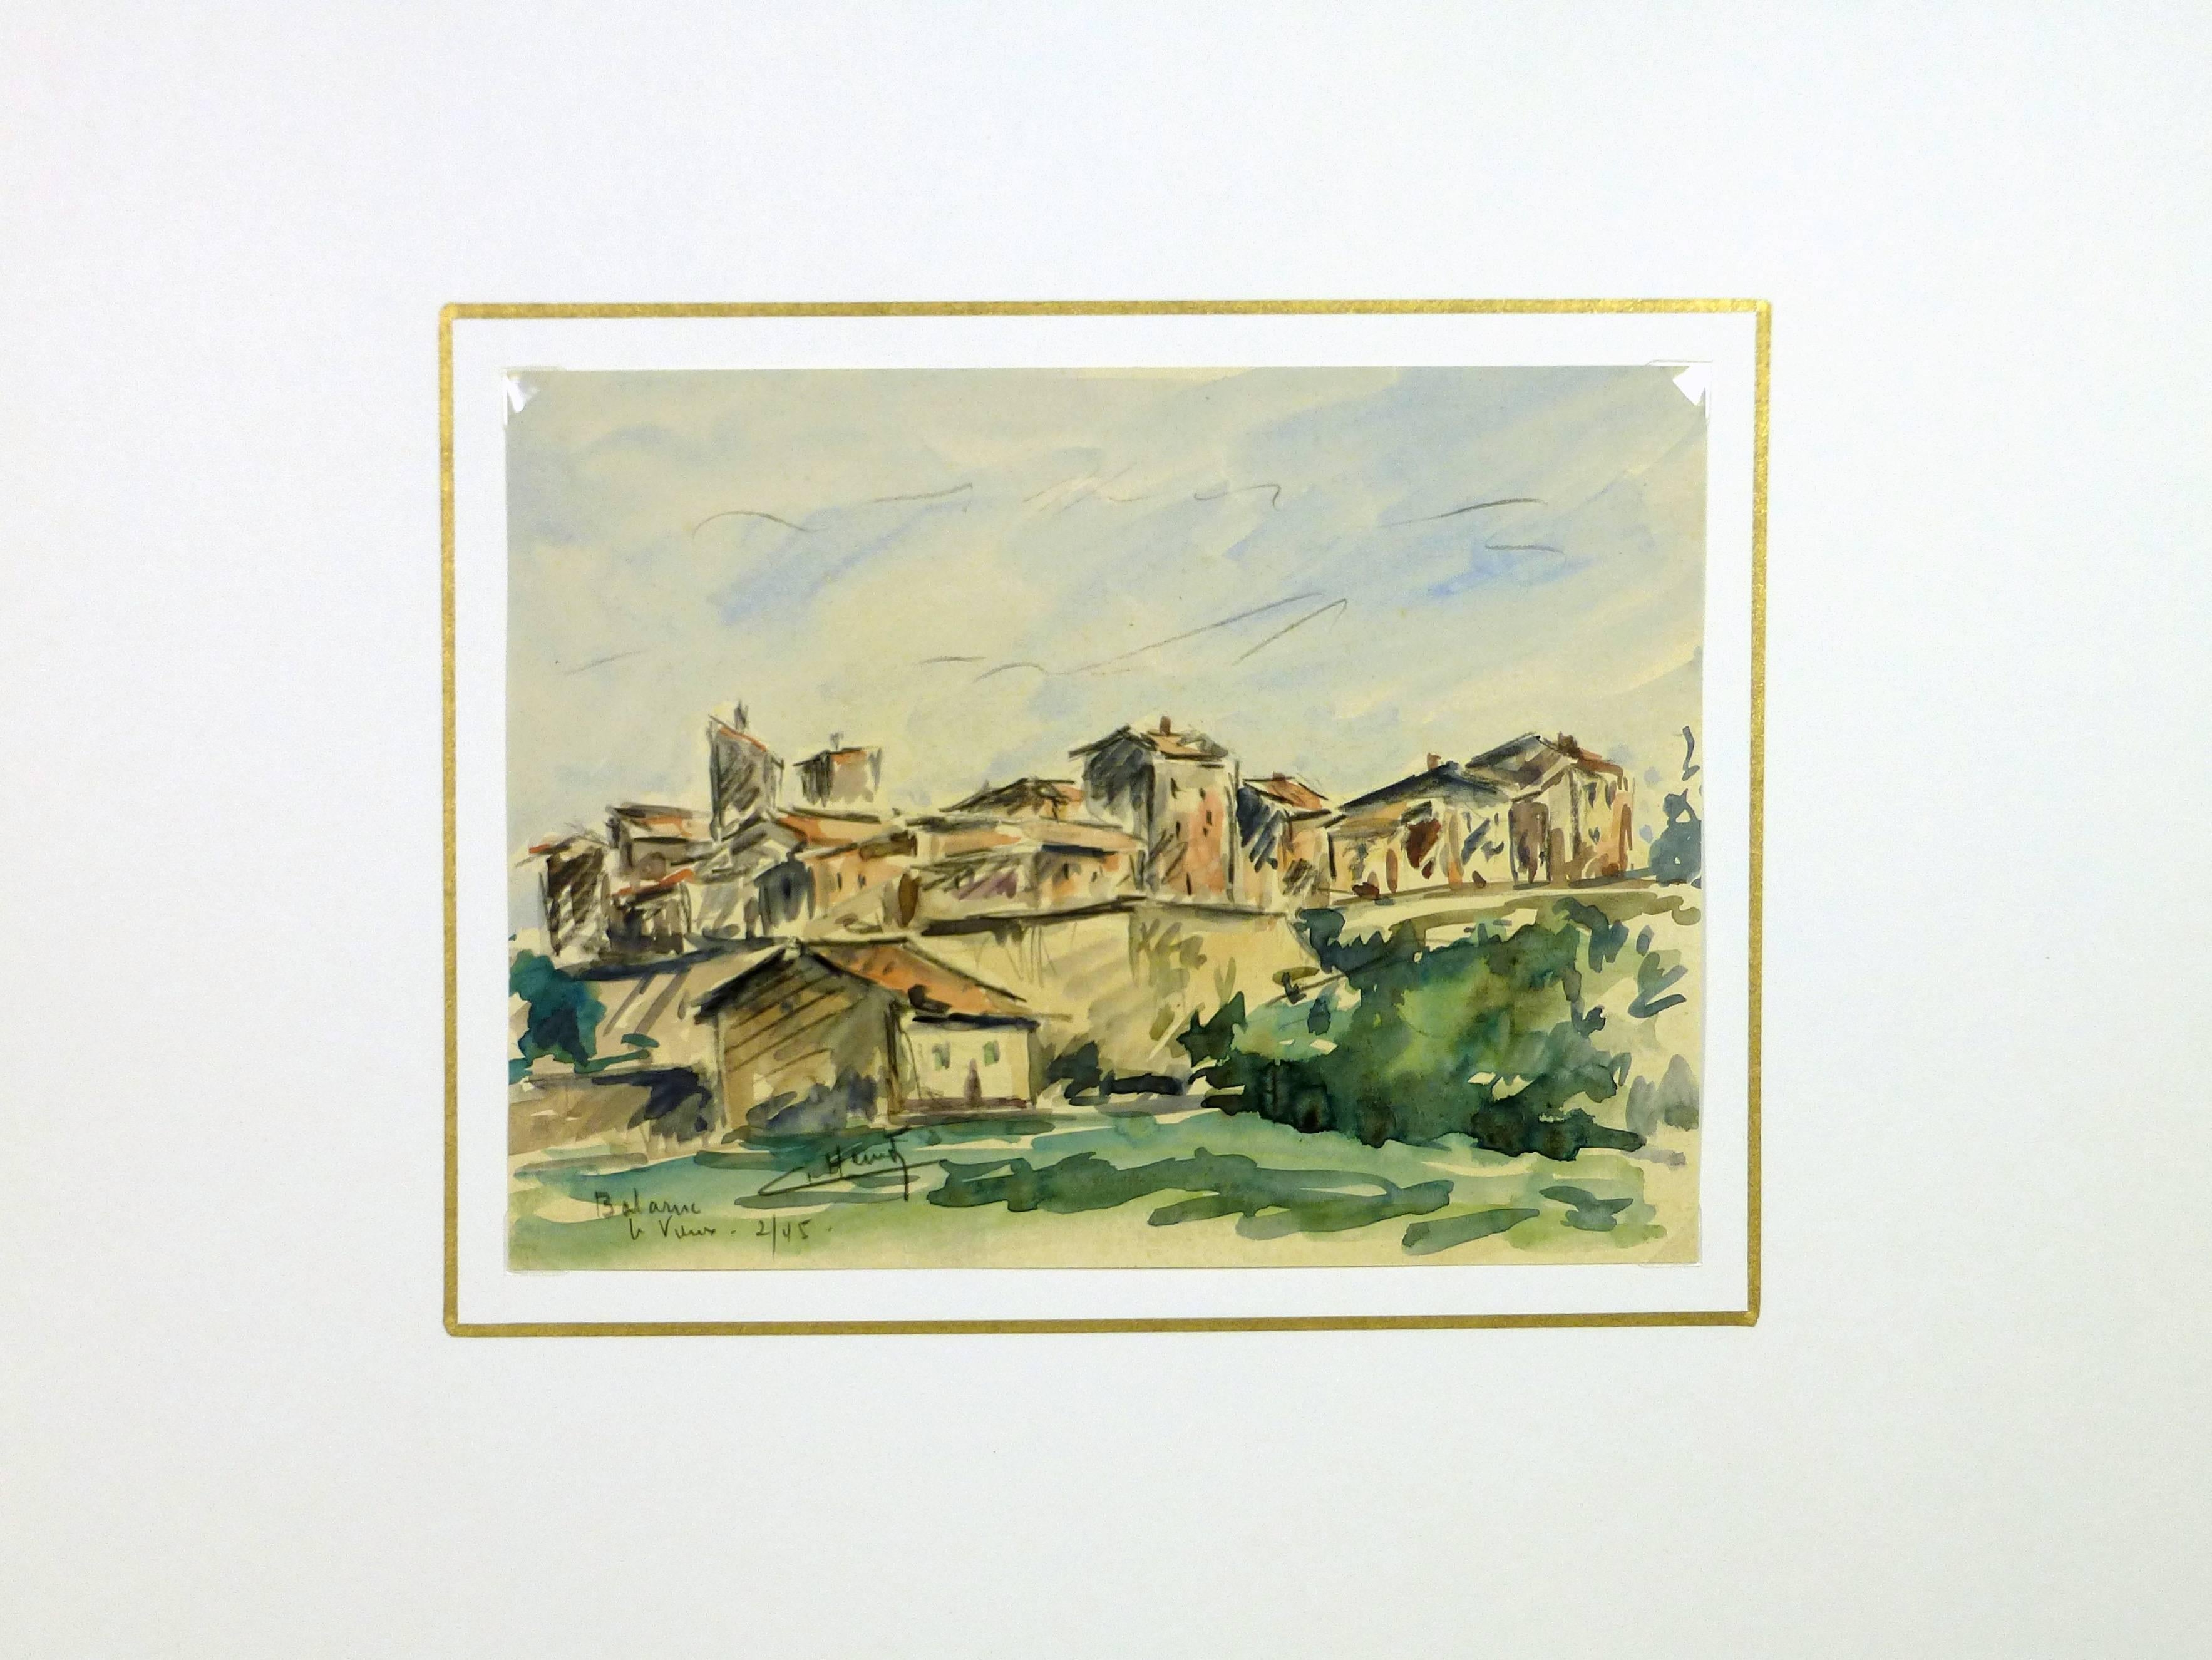 Inviting mid-century watercolor by artist C. Heintz, 1945.  Signed and dated lower left.

Original artwork on paper displayed on a white mat with a gold border. Mat fits a standard-sized frame. Archival plastic sleeve and Certificate of Authenticity